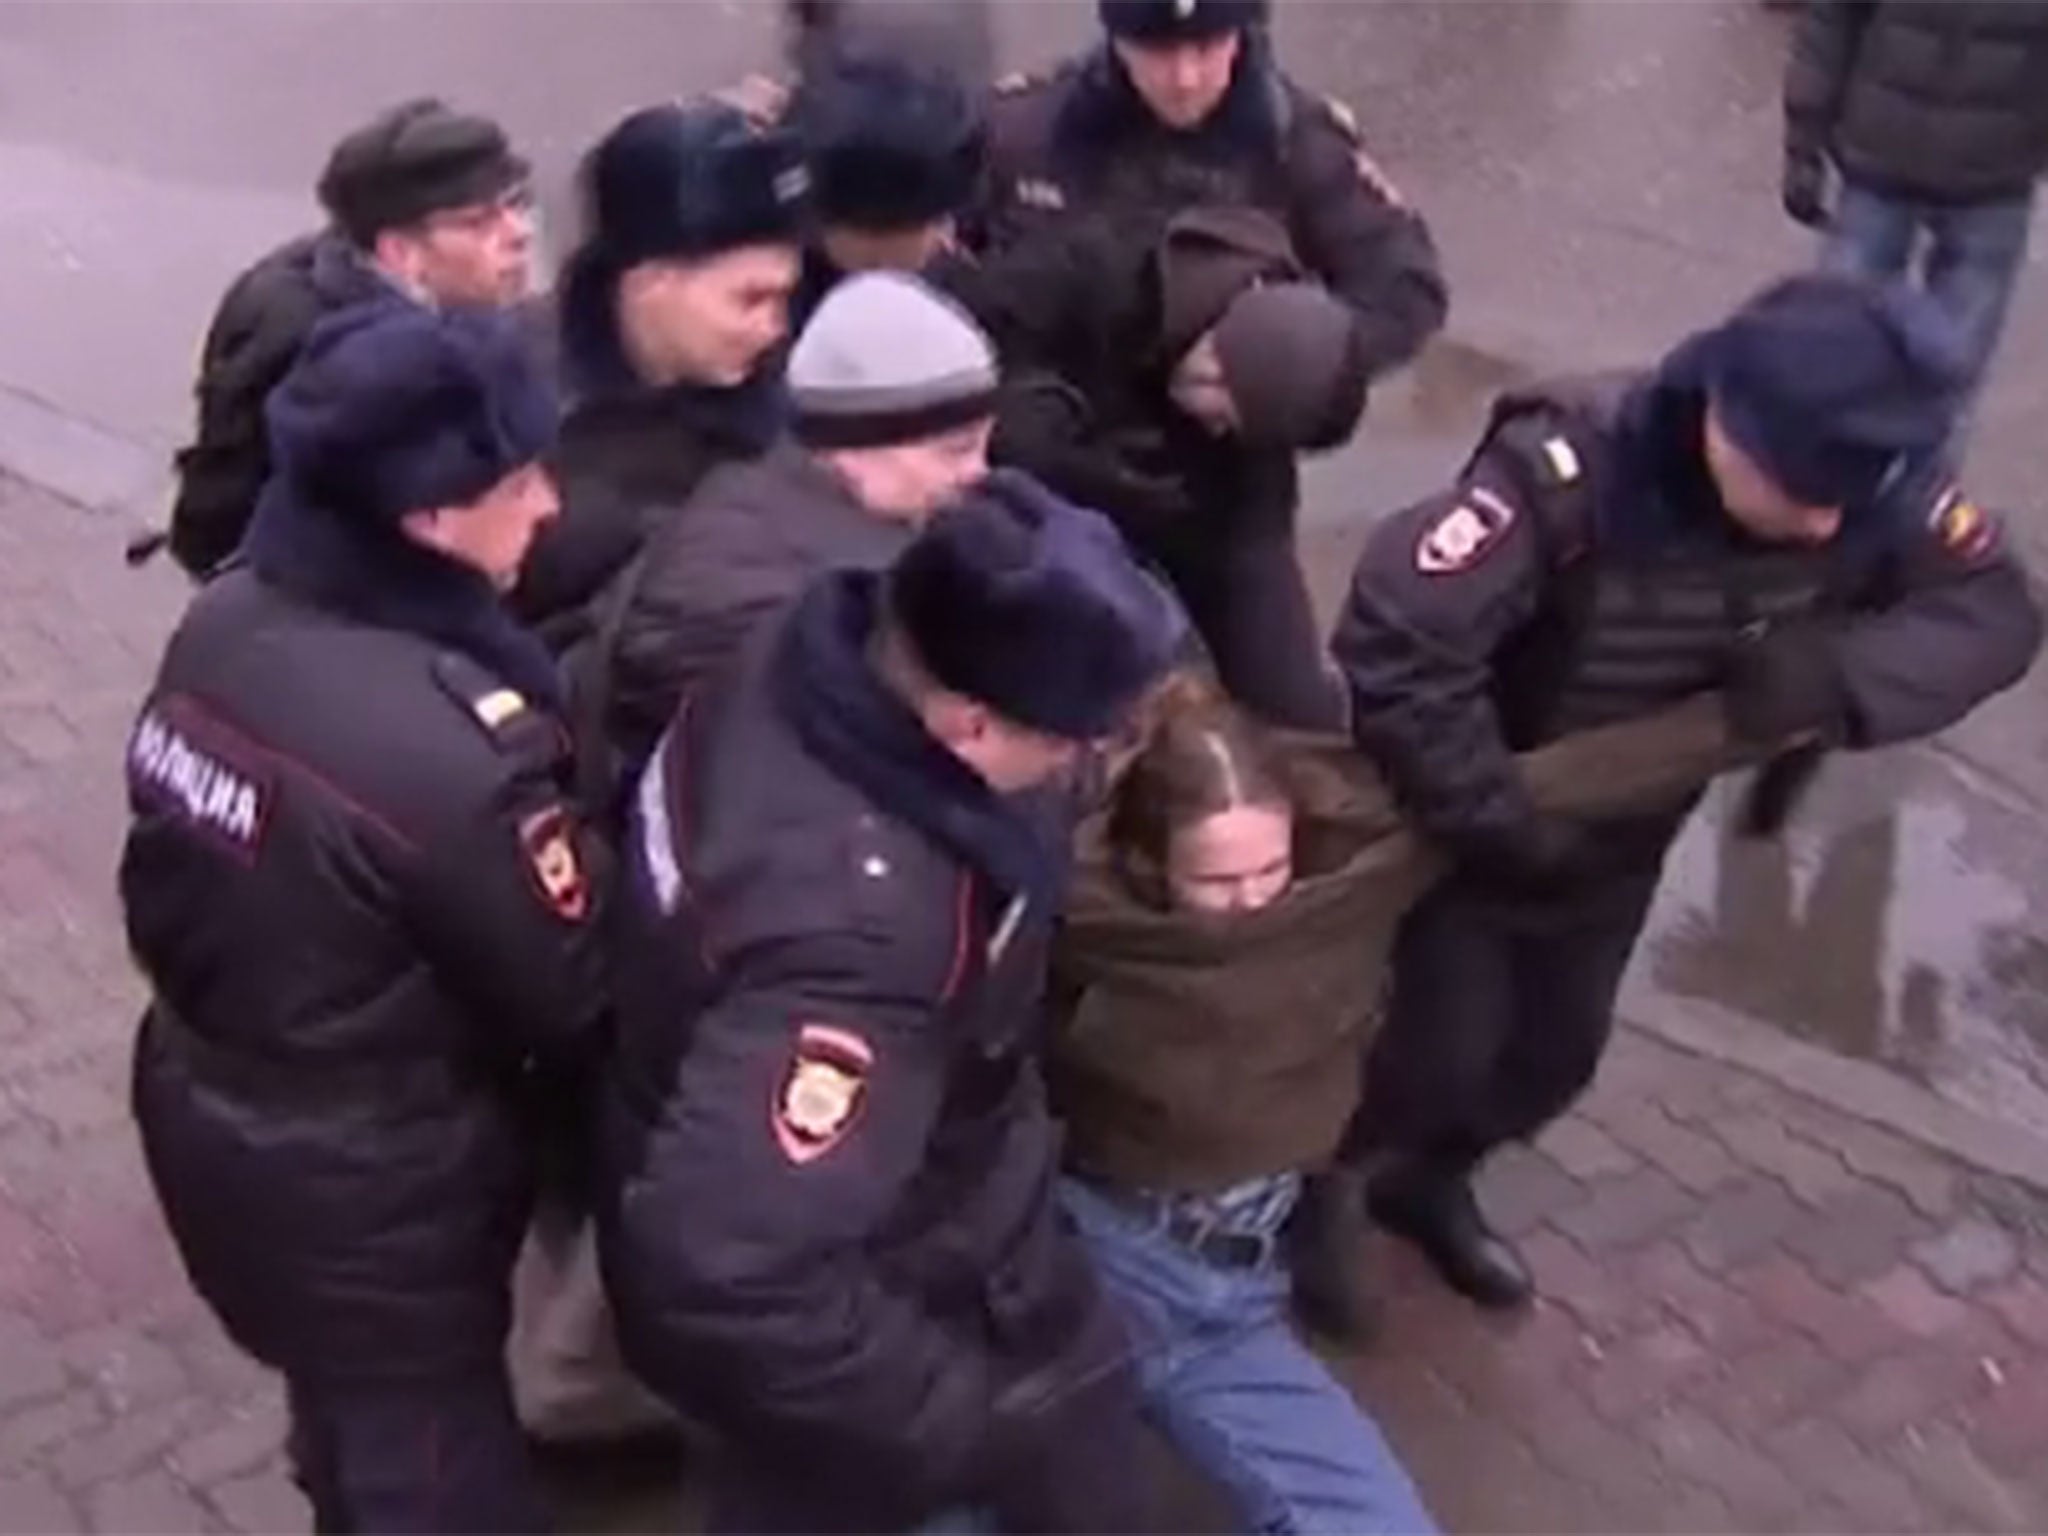 Police arrest protestors trying to get into Vladimir Putin's news conference.